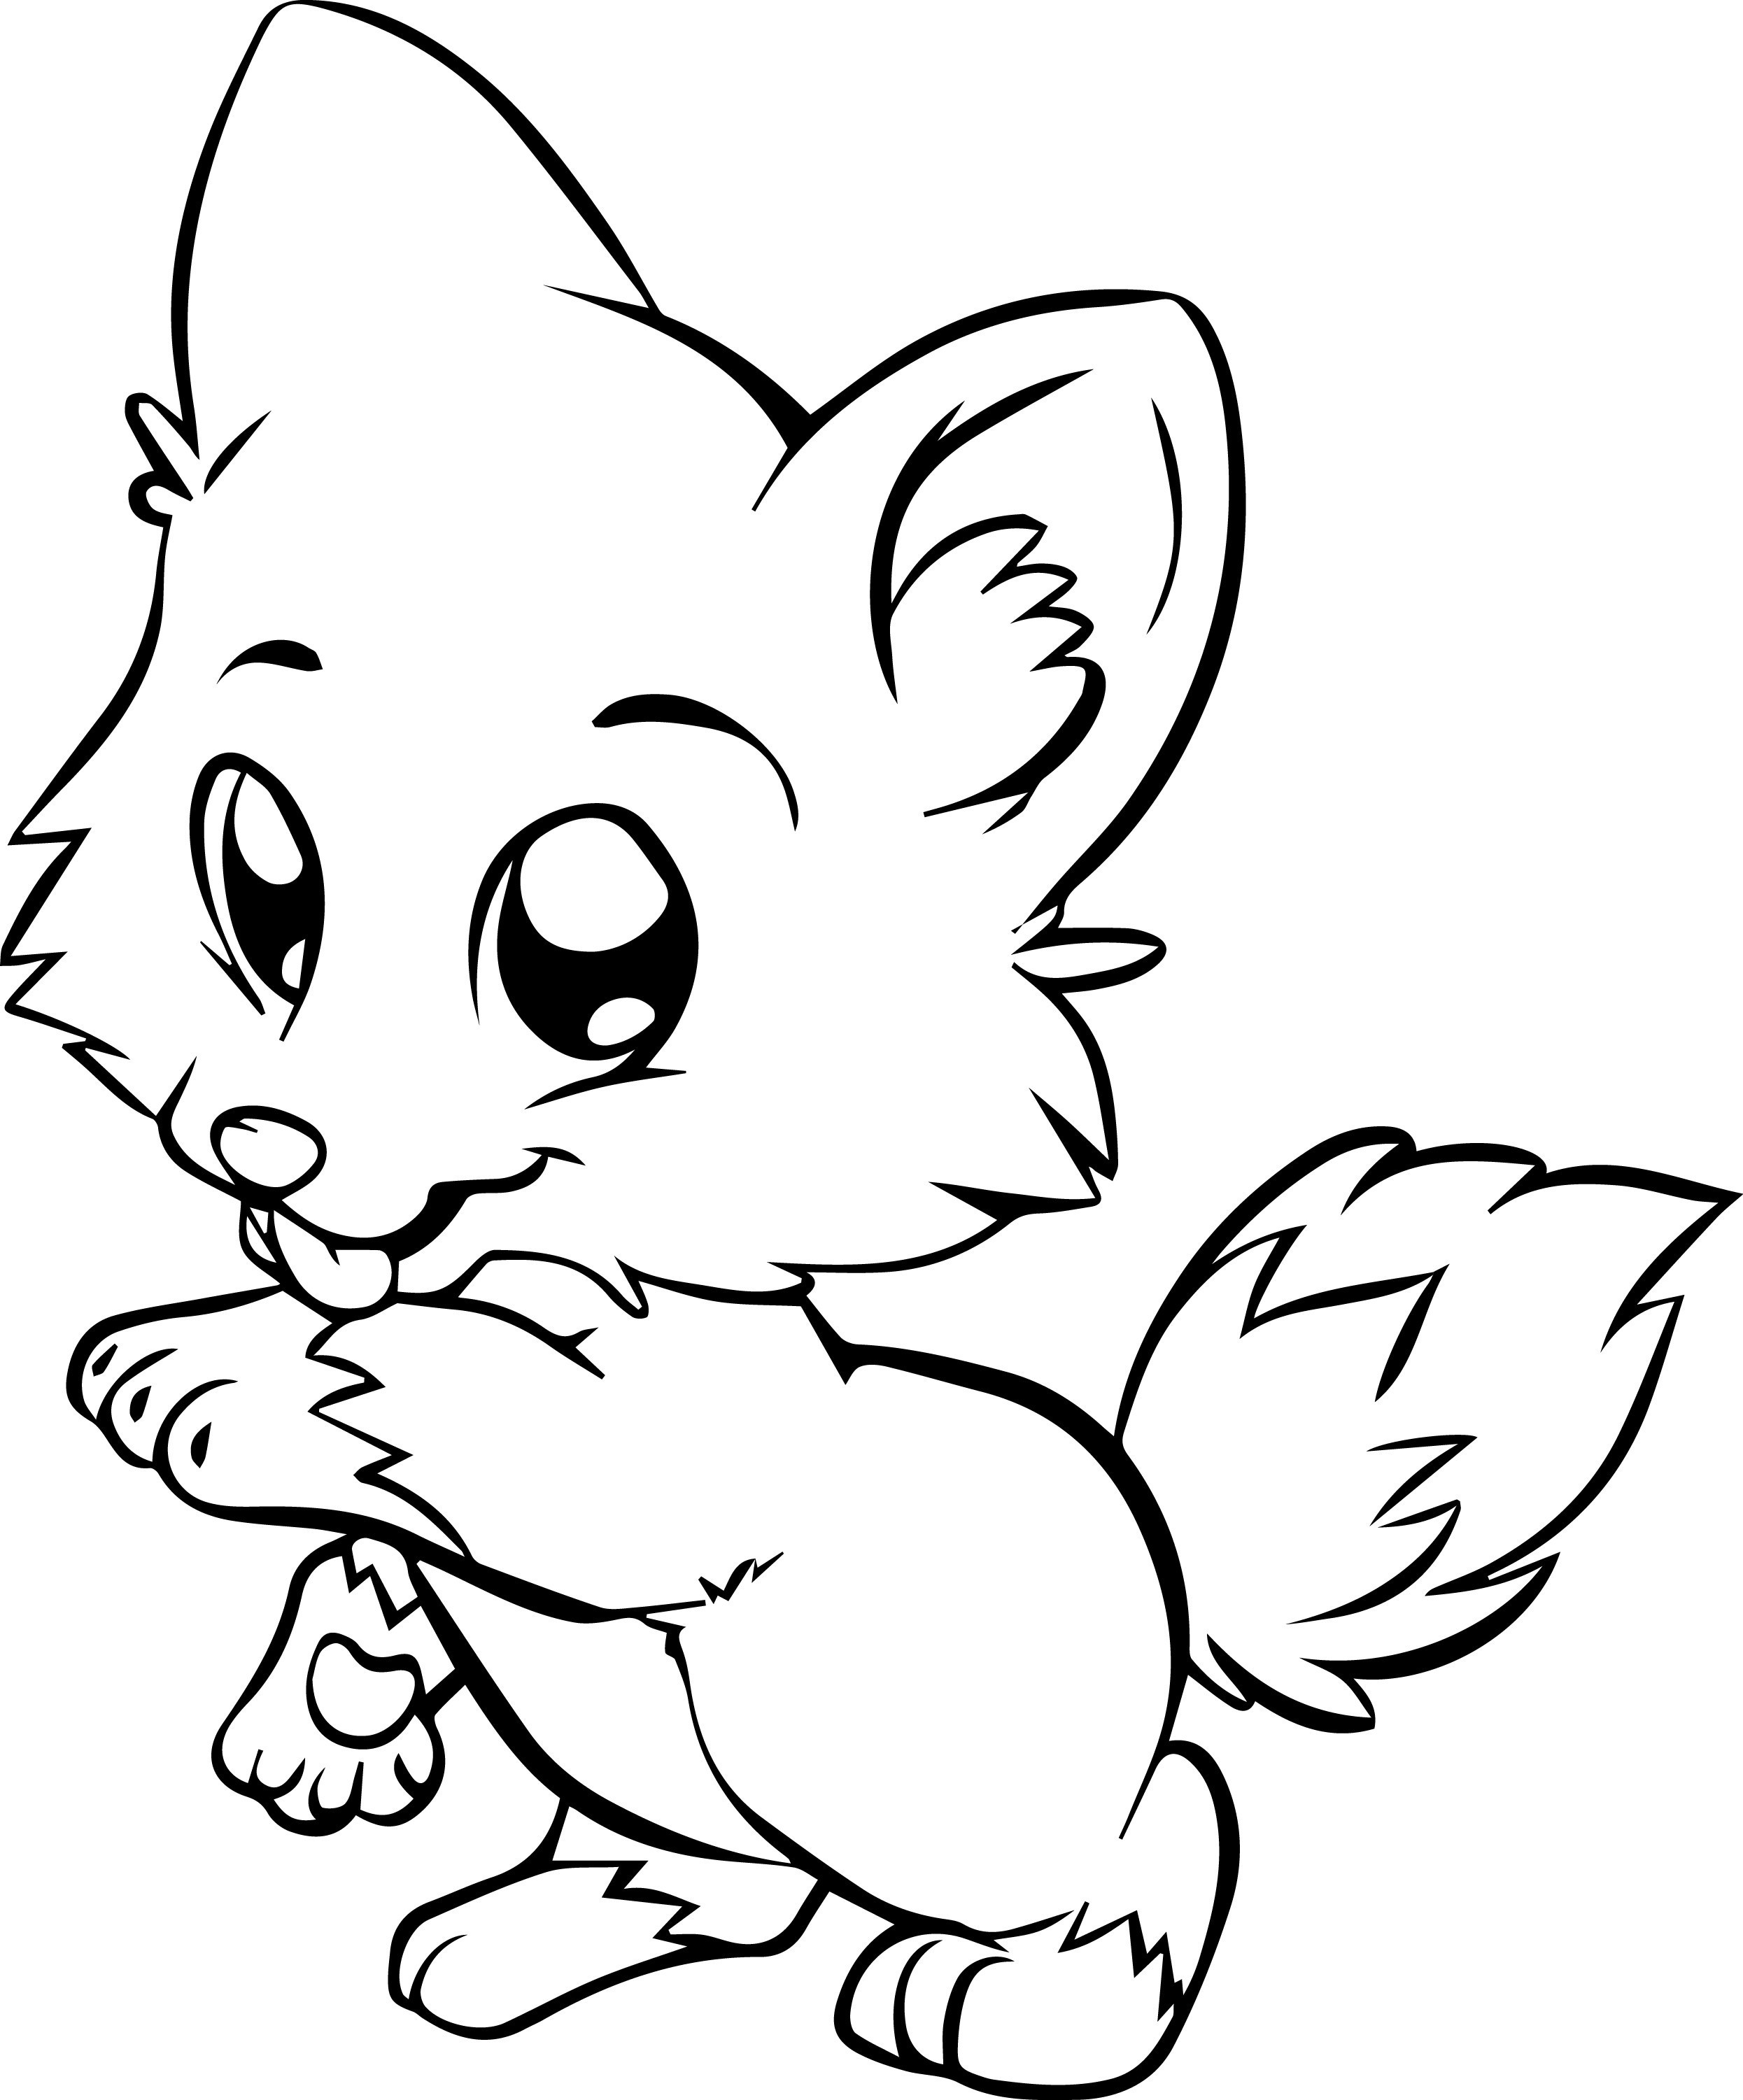 Featured image of post Kawaii Cute Coloring Pages Hard : Feel free to print and color from the best 40+ cute kawaii coloring pages at getcolorings.com.